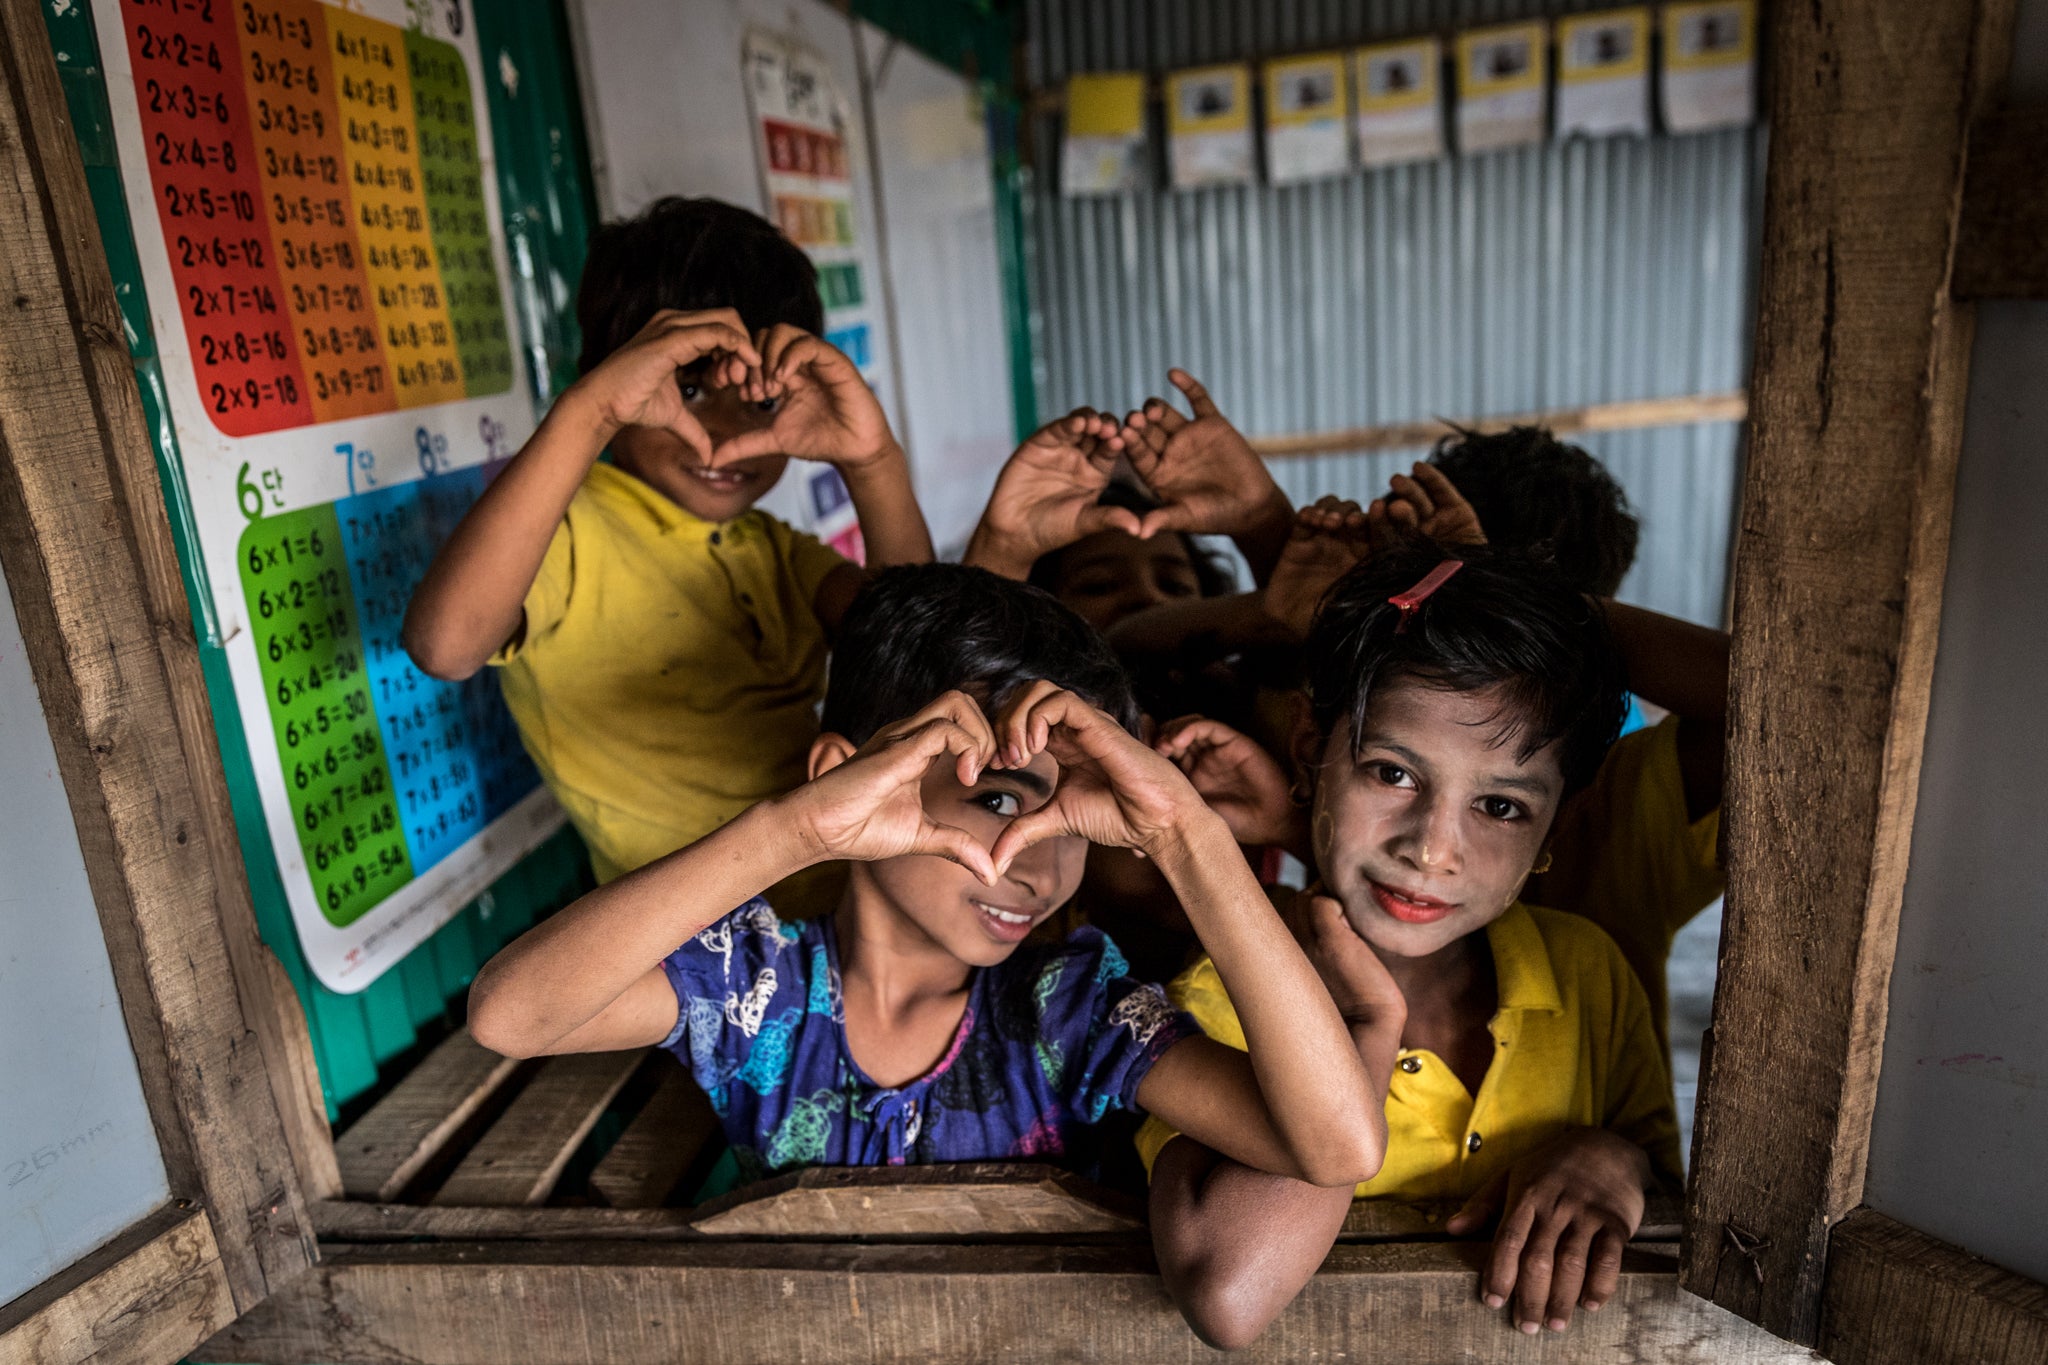 A group of kids crowd together to look out of a schoolroom window. Three of the kids are holding up hands in the shape of hearts in front of their faces.